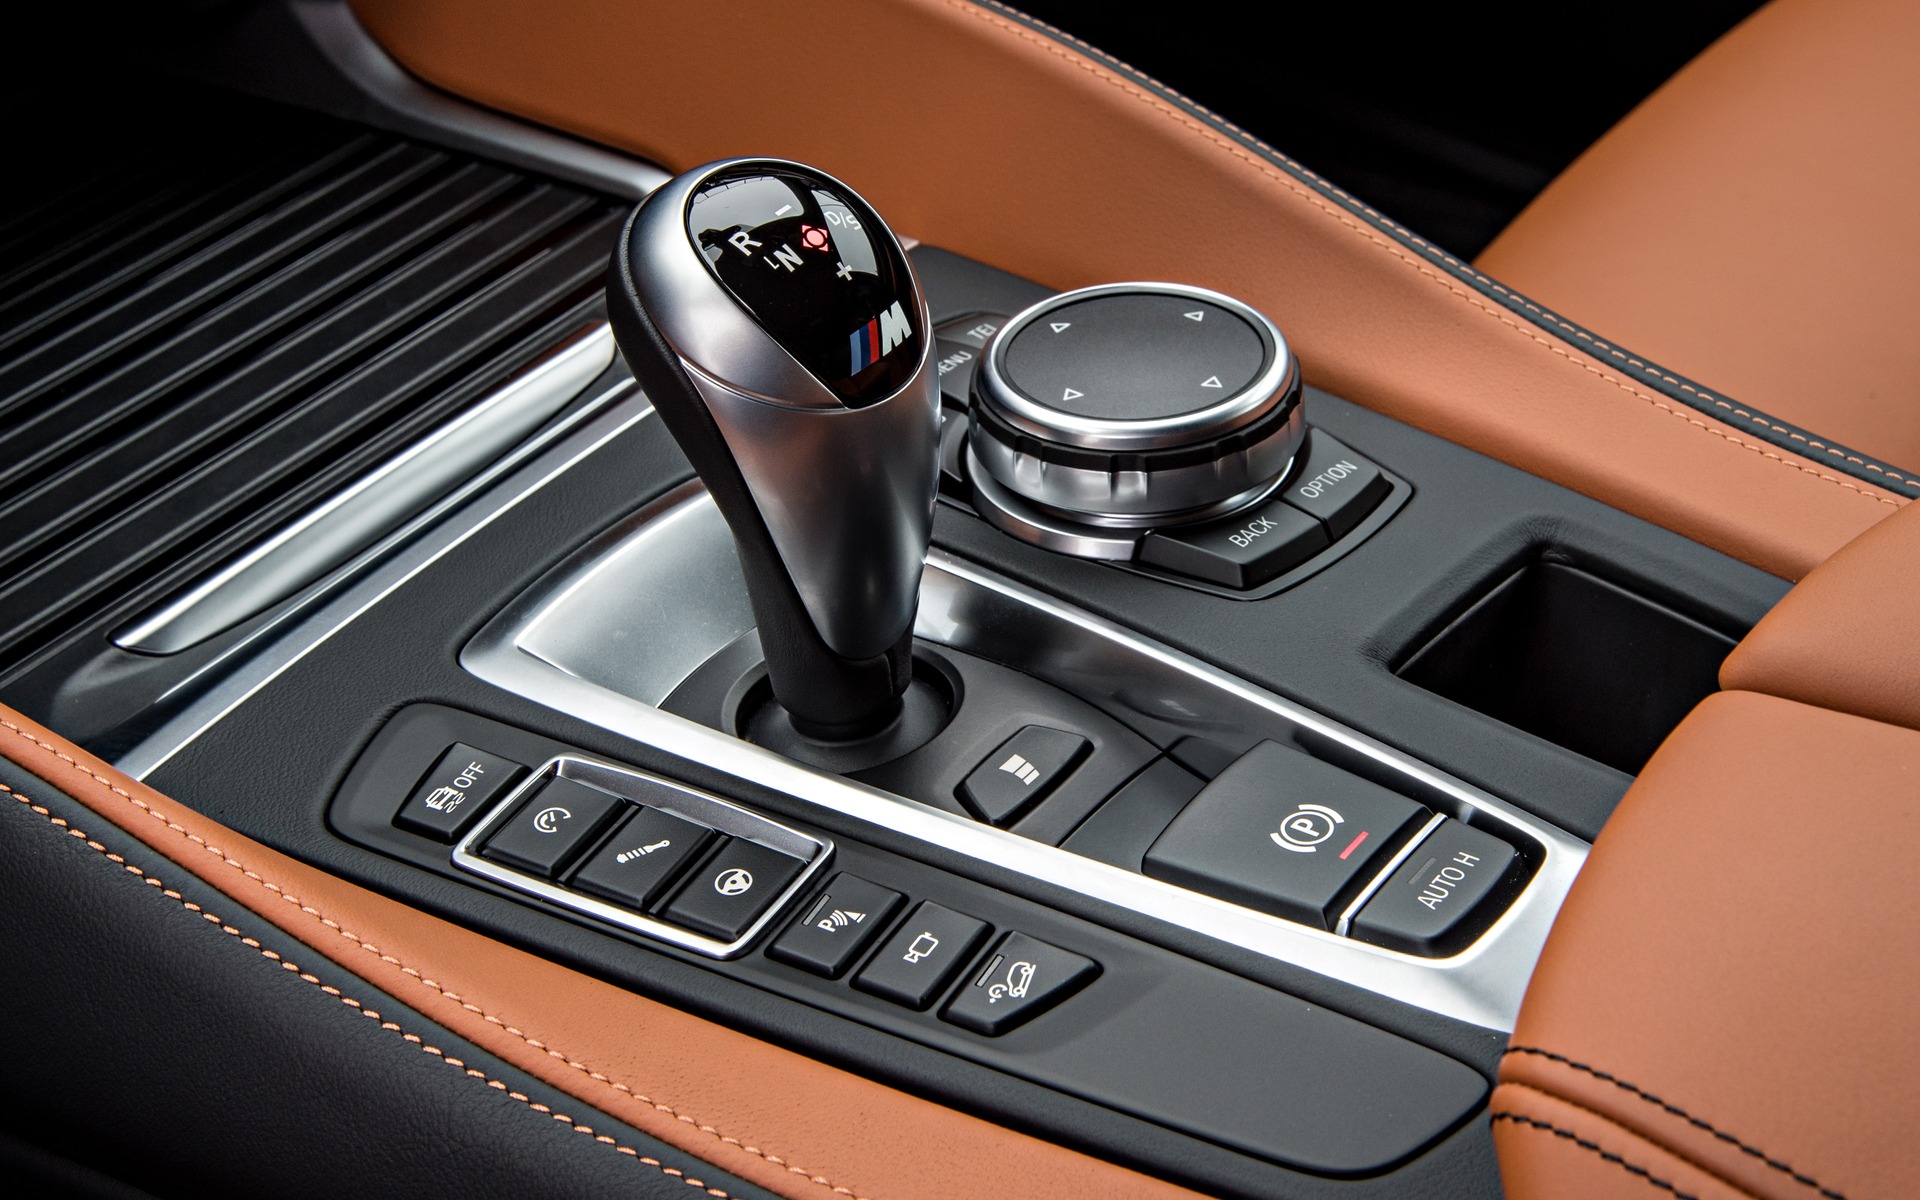 An eight-speed automatic transmission is standard with the X6 M.